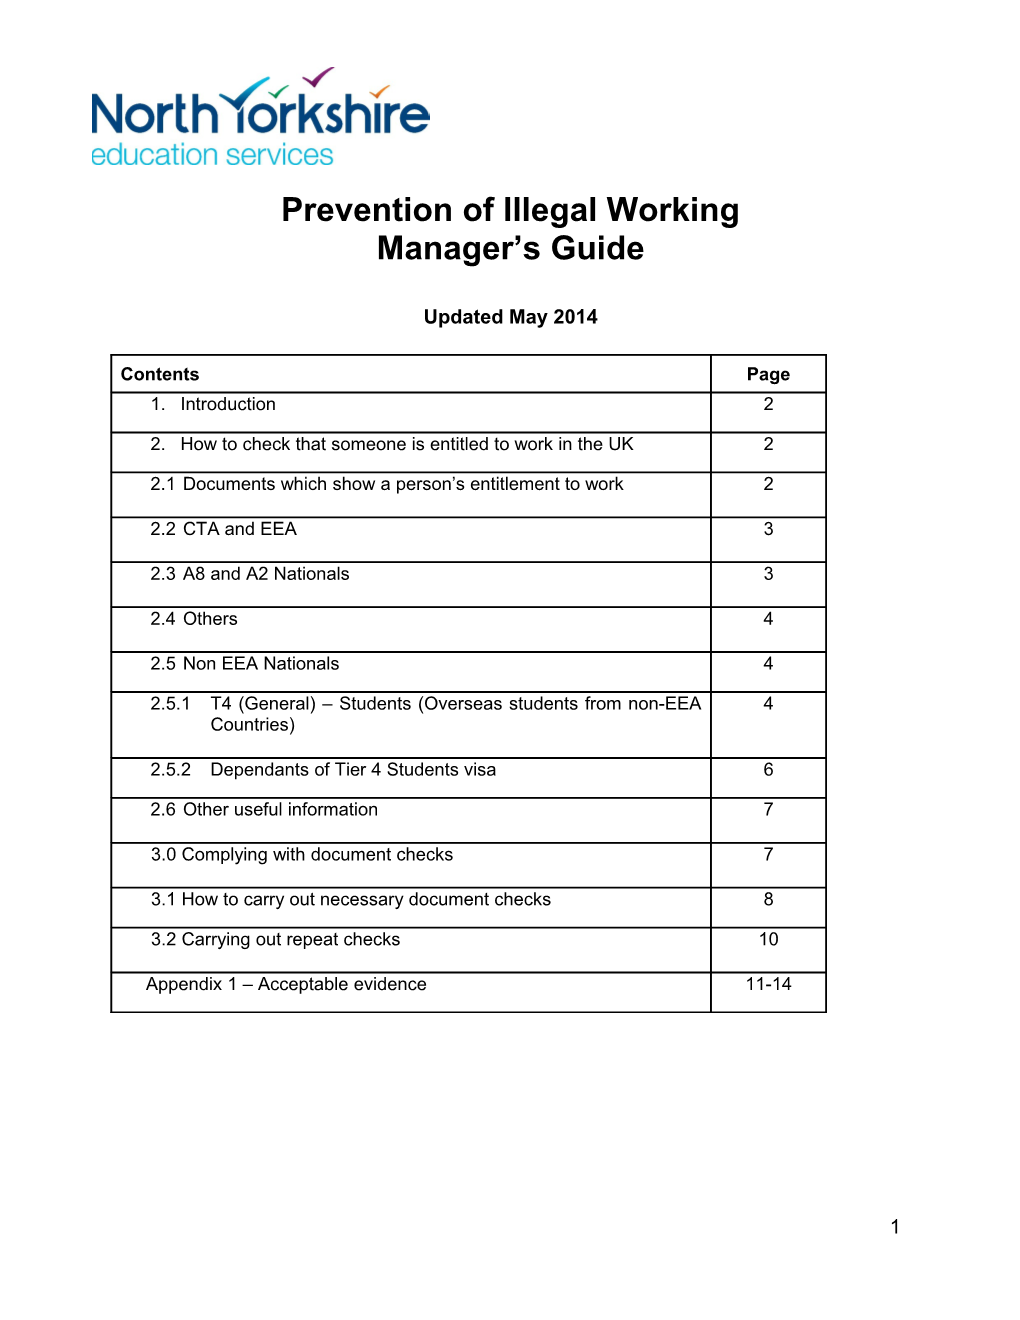 Prevention of Illegal Working - Managers Guide